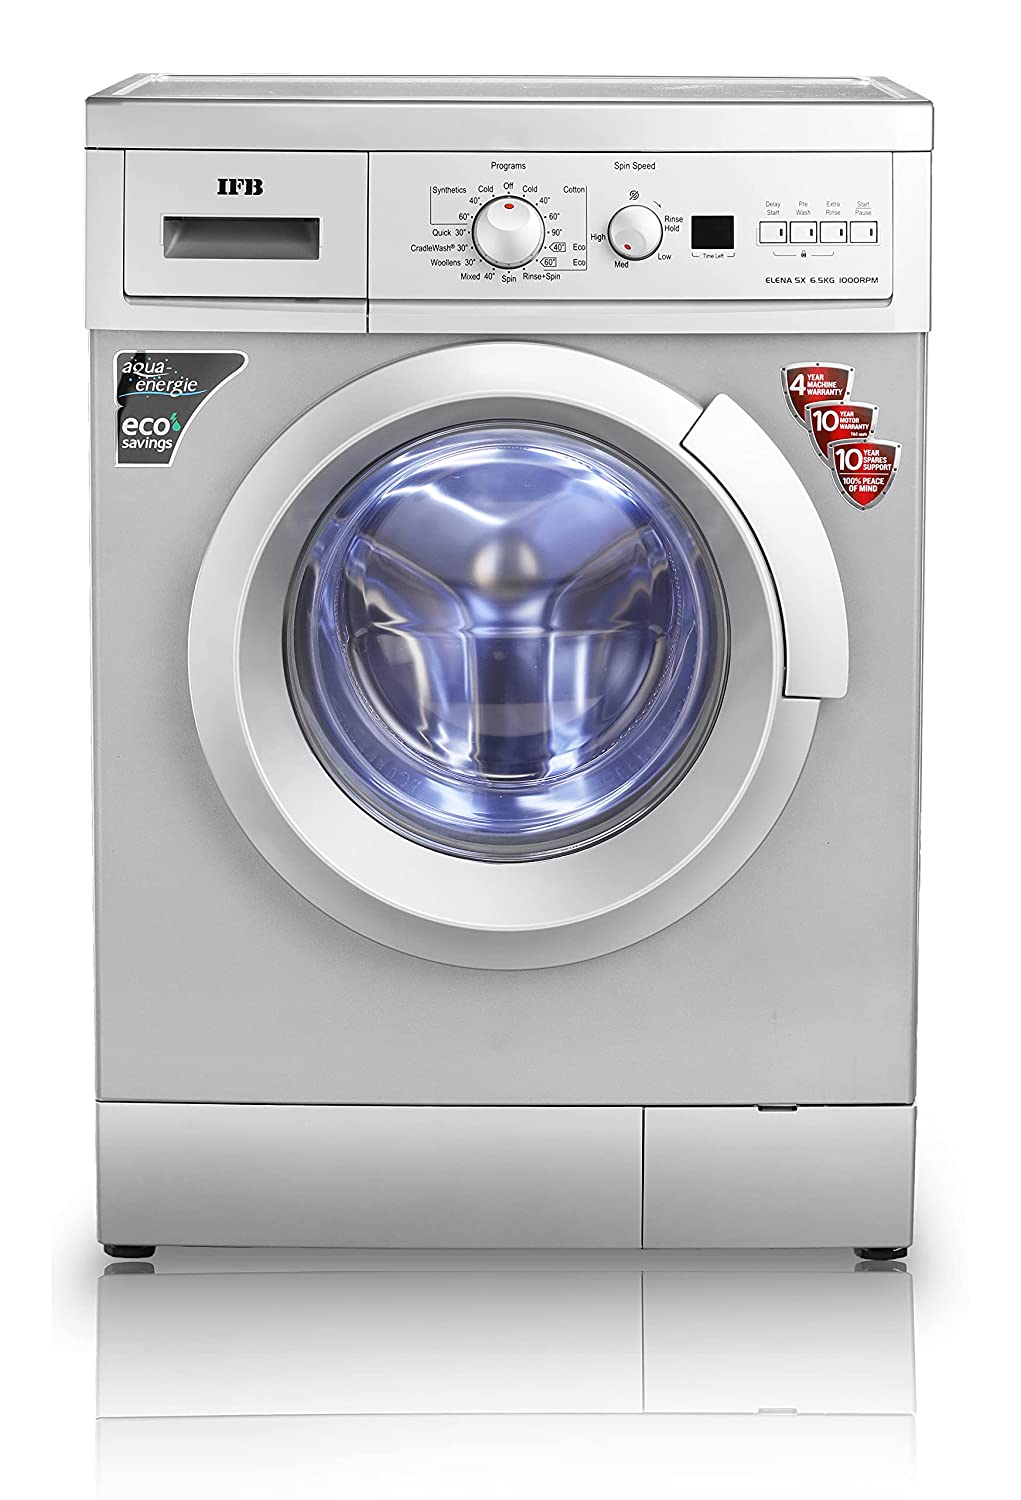 IFB 6.5 Kg Fully-Automatic Front Loading Washing Machine (Elena SX 6510, SX -Silver, In-Built Heater)